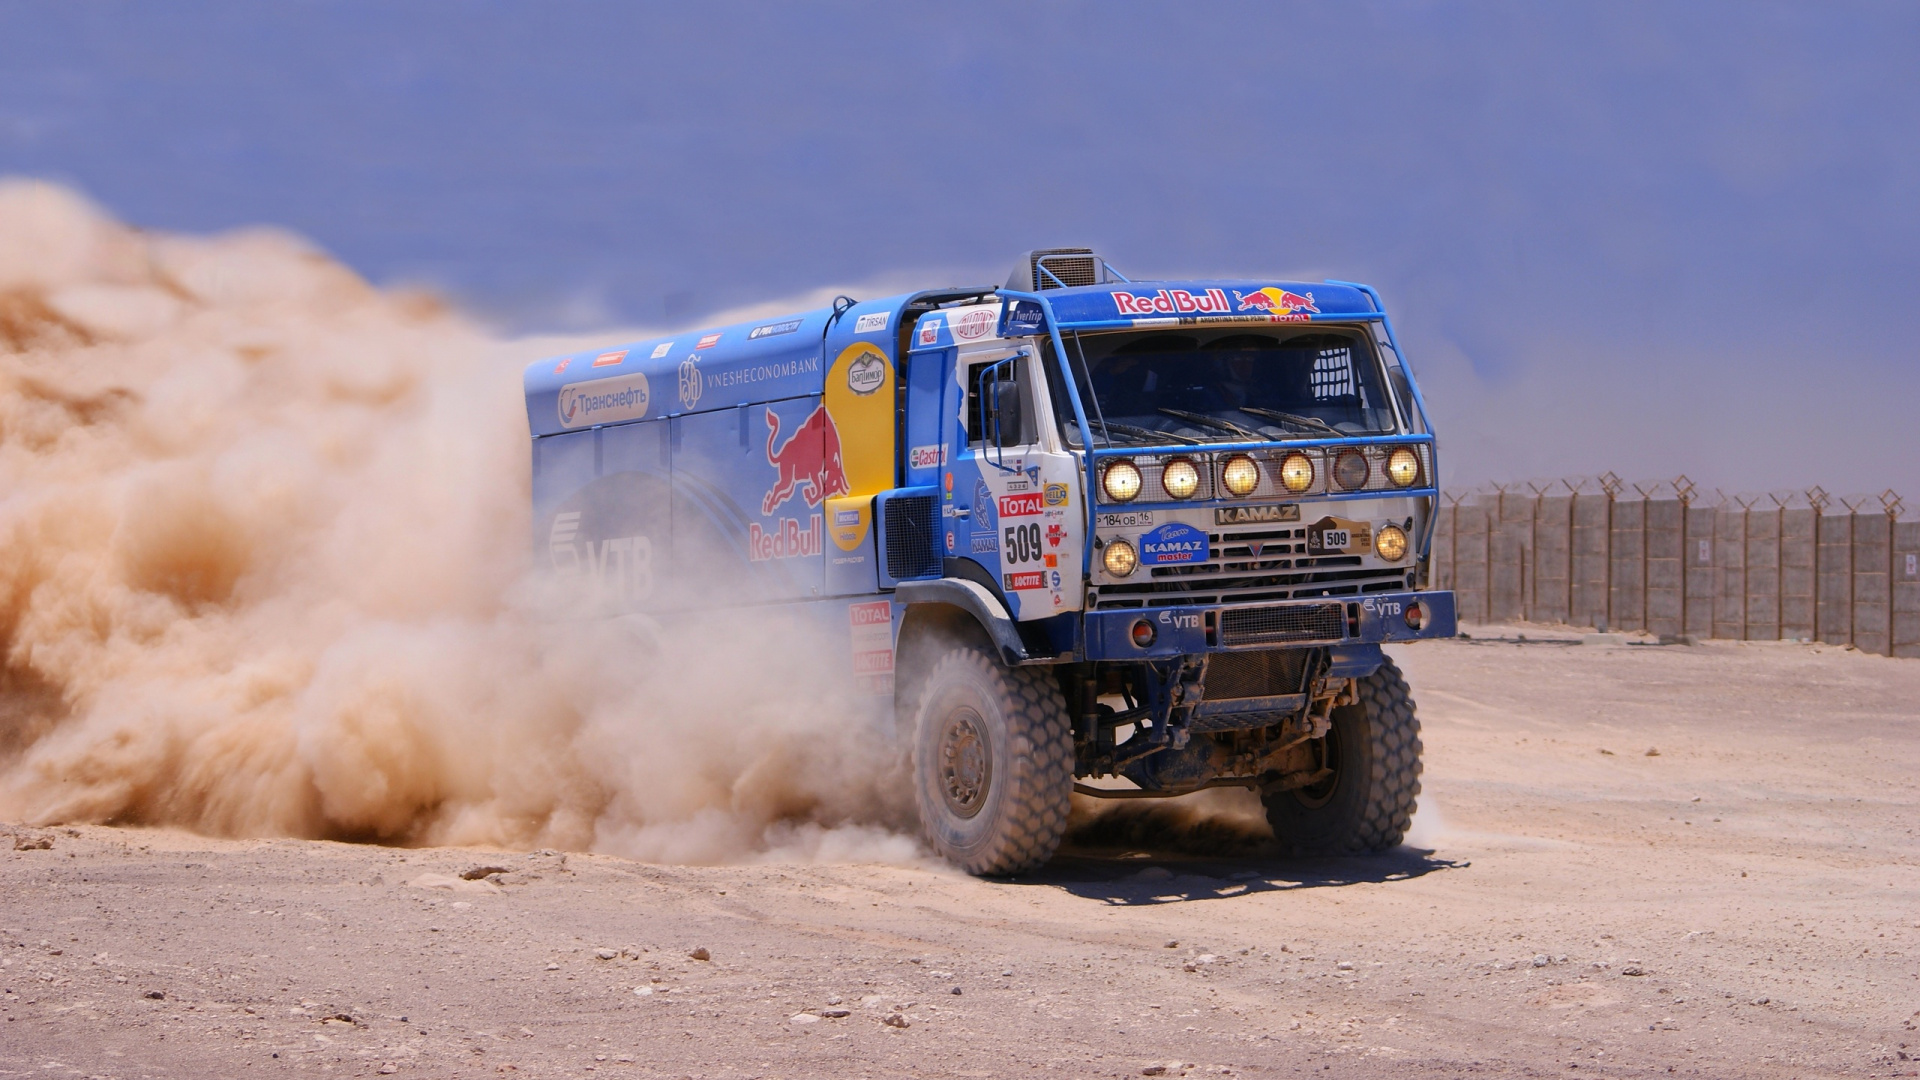 Blue and Yellow Truck on Dirt Road. Wallpaper in 1920x1080 Resolution